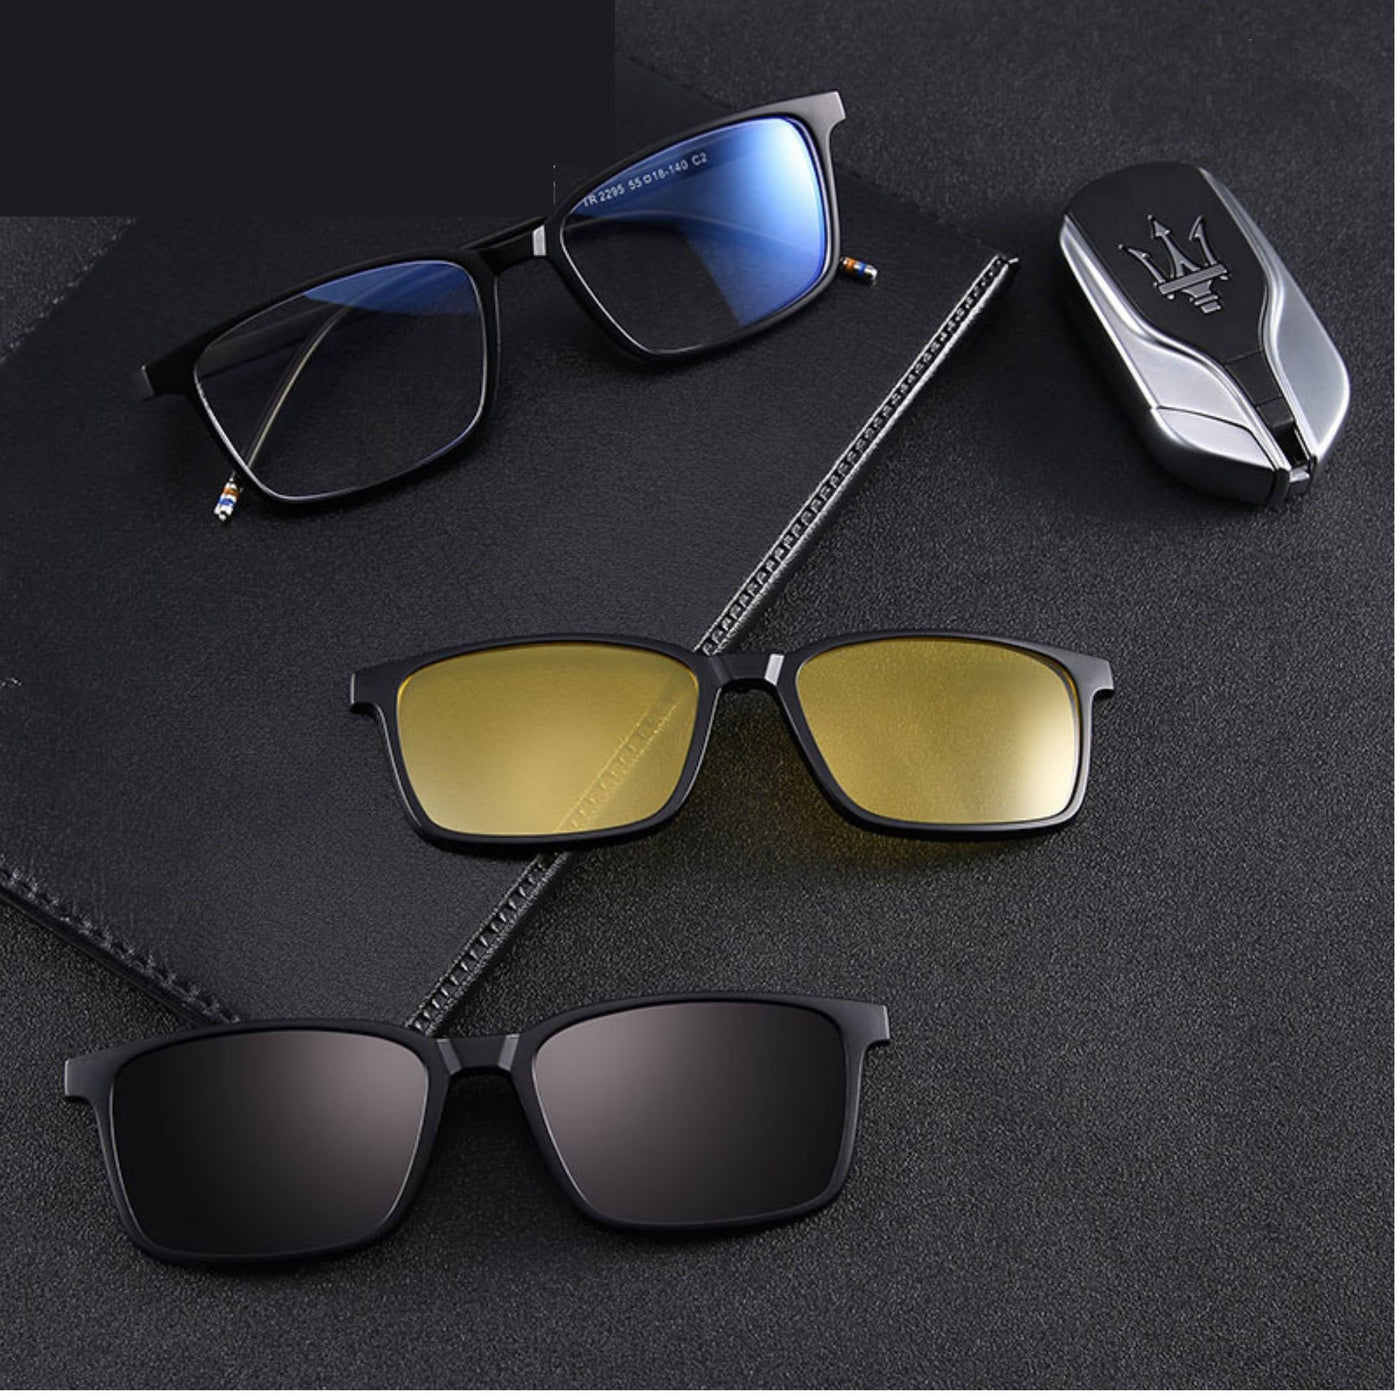 Classic Crane Changeable Lens Eyewear For Men And Women-Unique and Classy